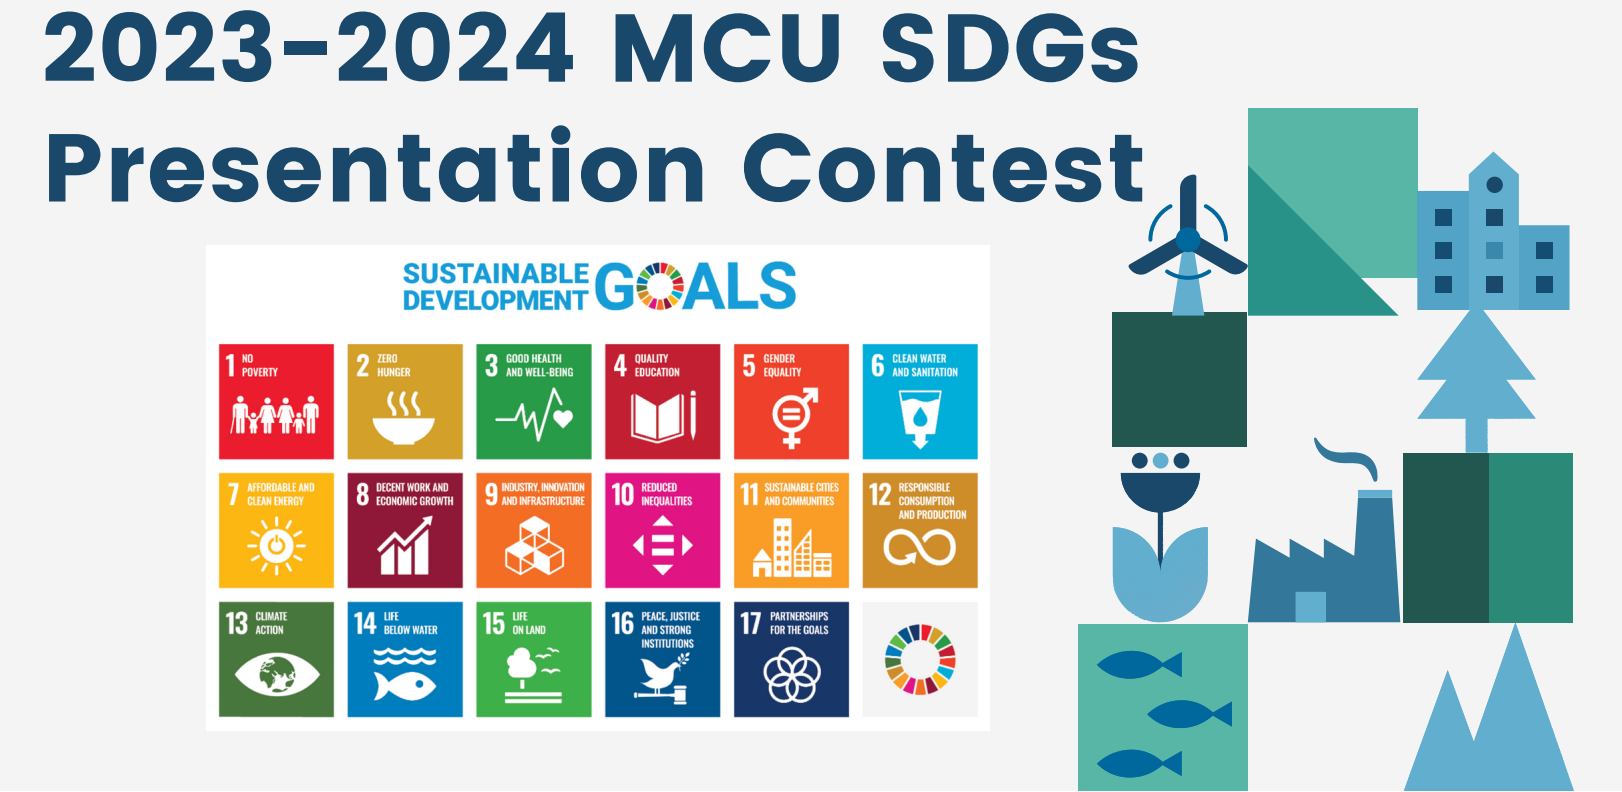 Featured image for “2024. 04. 09 SDGs Presentation Contest Shortlisted Candidates”